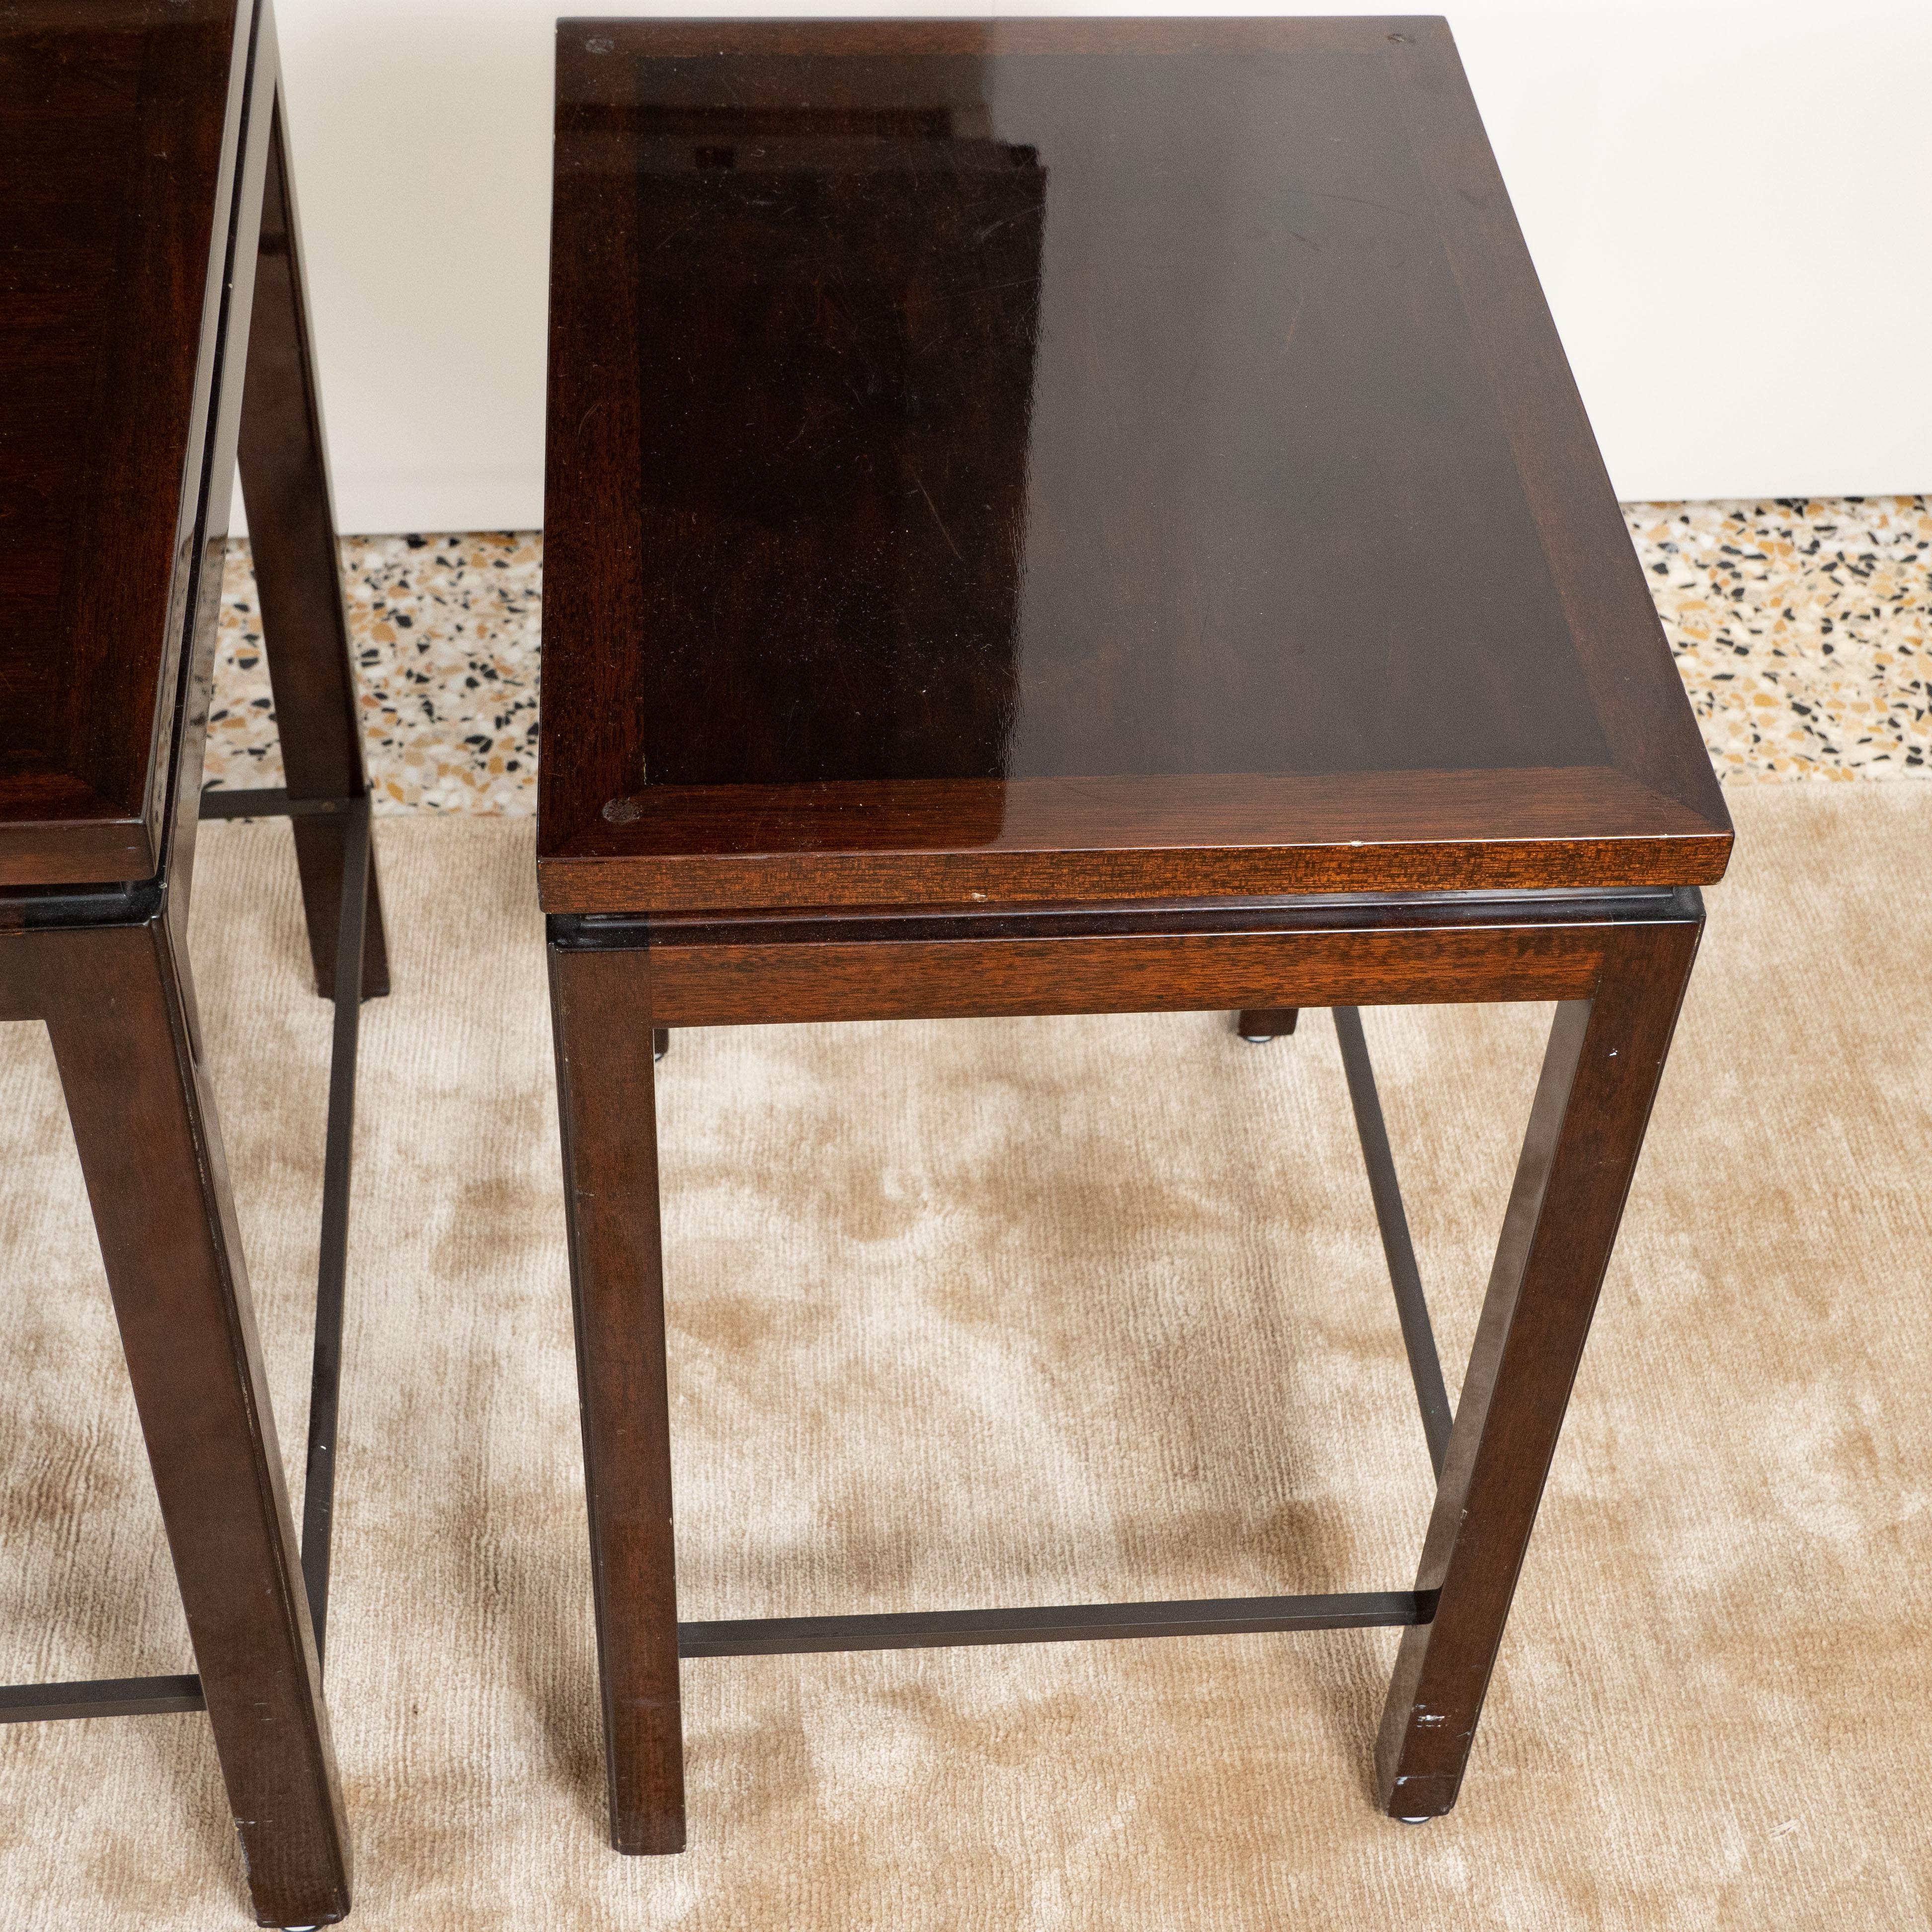 Dunbar Janus Set of 3 Nesting Tables by Edward Wormley from Alan Moss 1